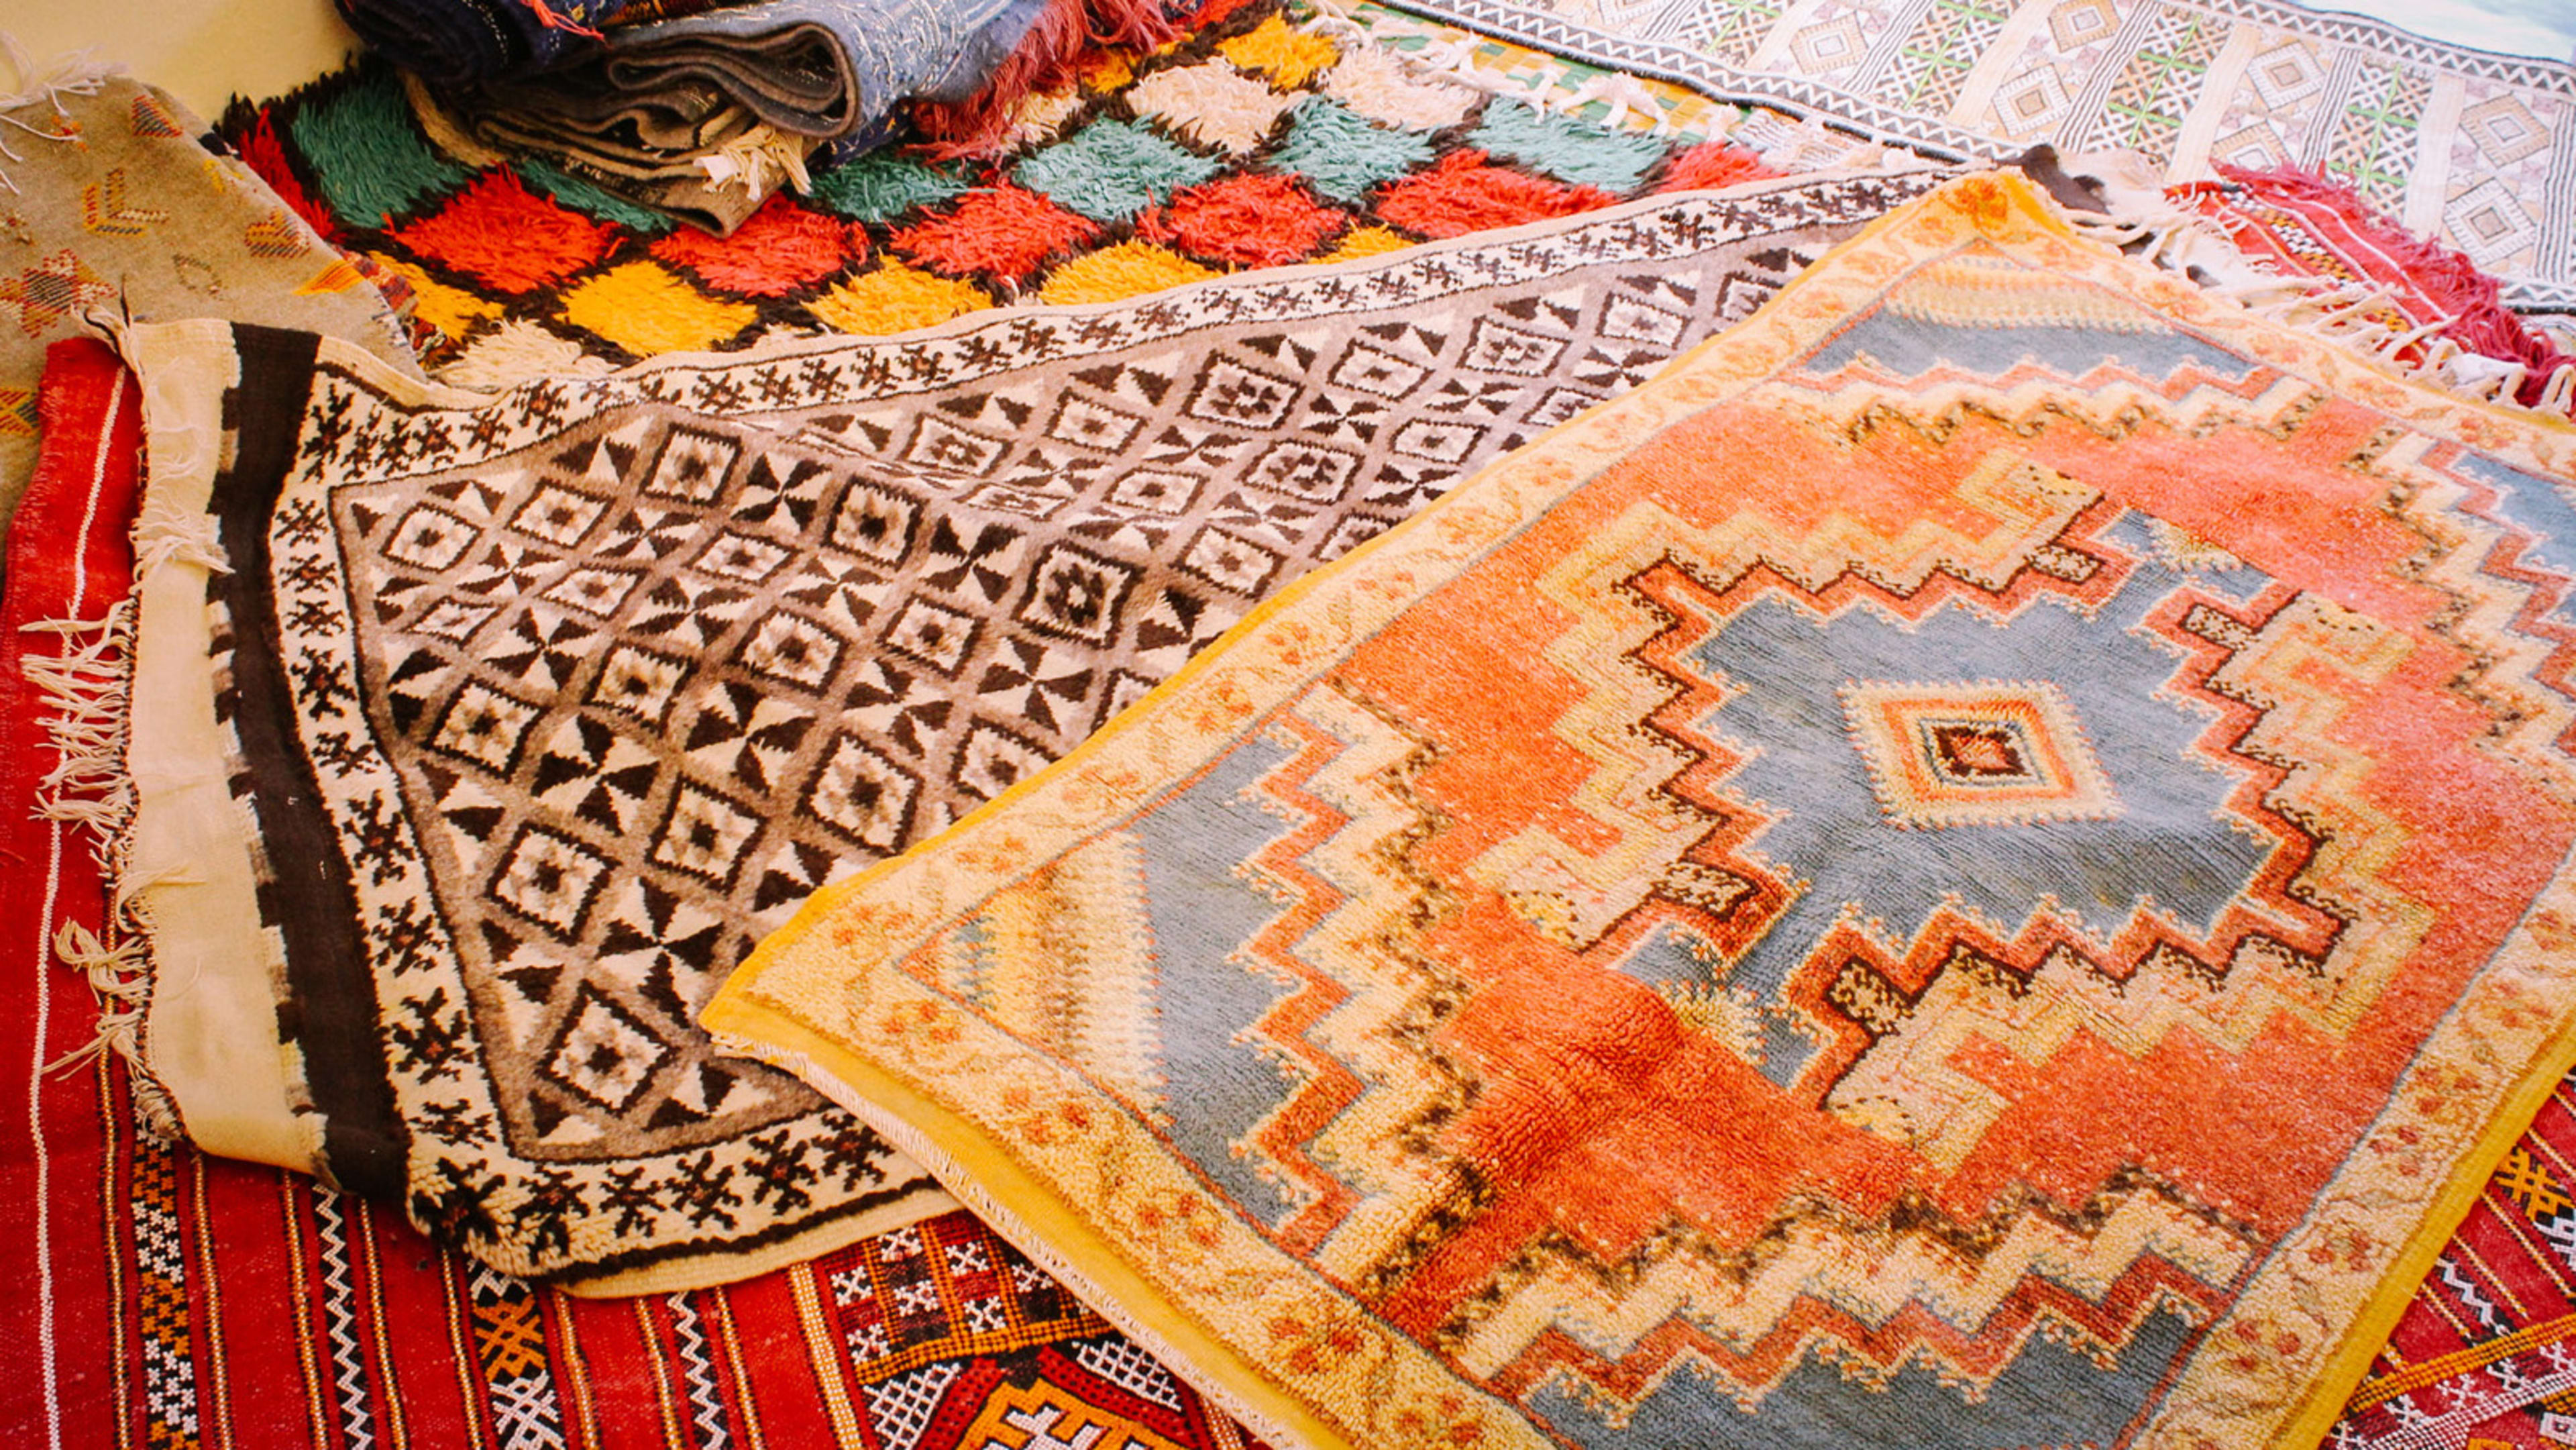 This Moroccan rug startup sells the work of women master weavers—fairly